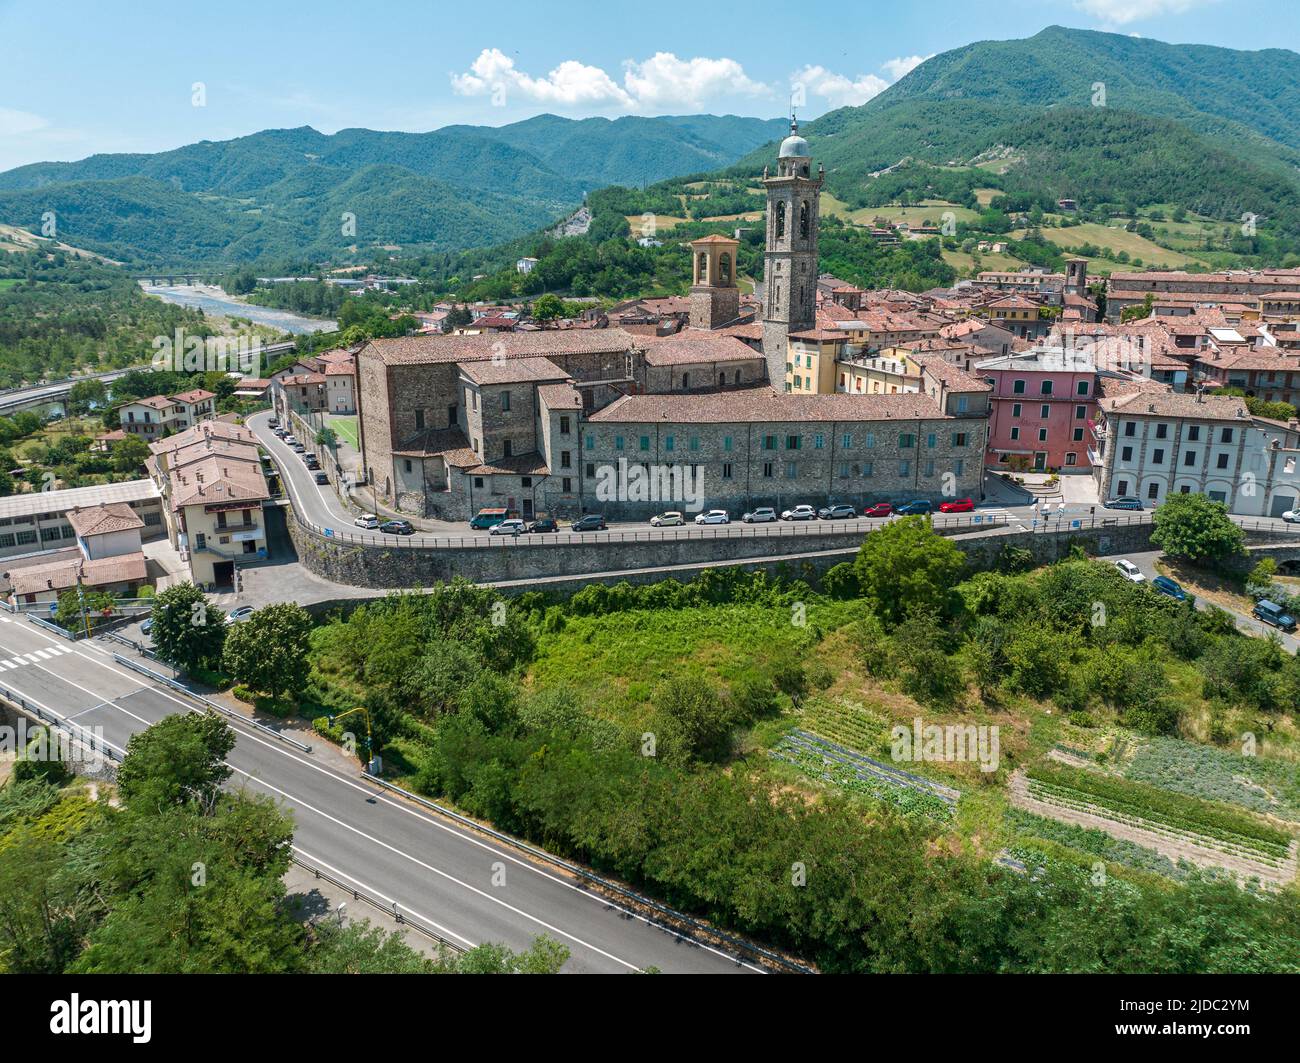 Aerial view of Bobbio, a town on the Trebbia river. Bridge. Piacenza, Emilia-Romagna. Details of the urban complex, roofs and bell towers. Italy Stock Photo